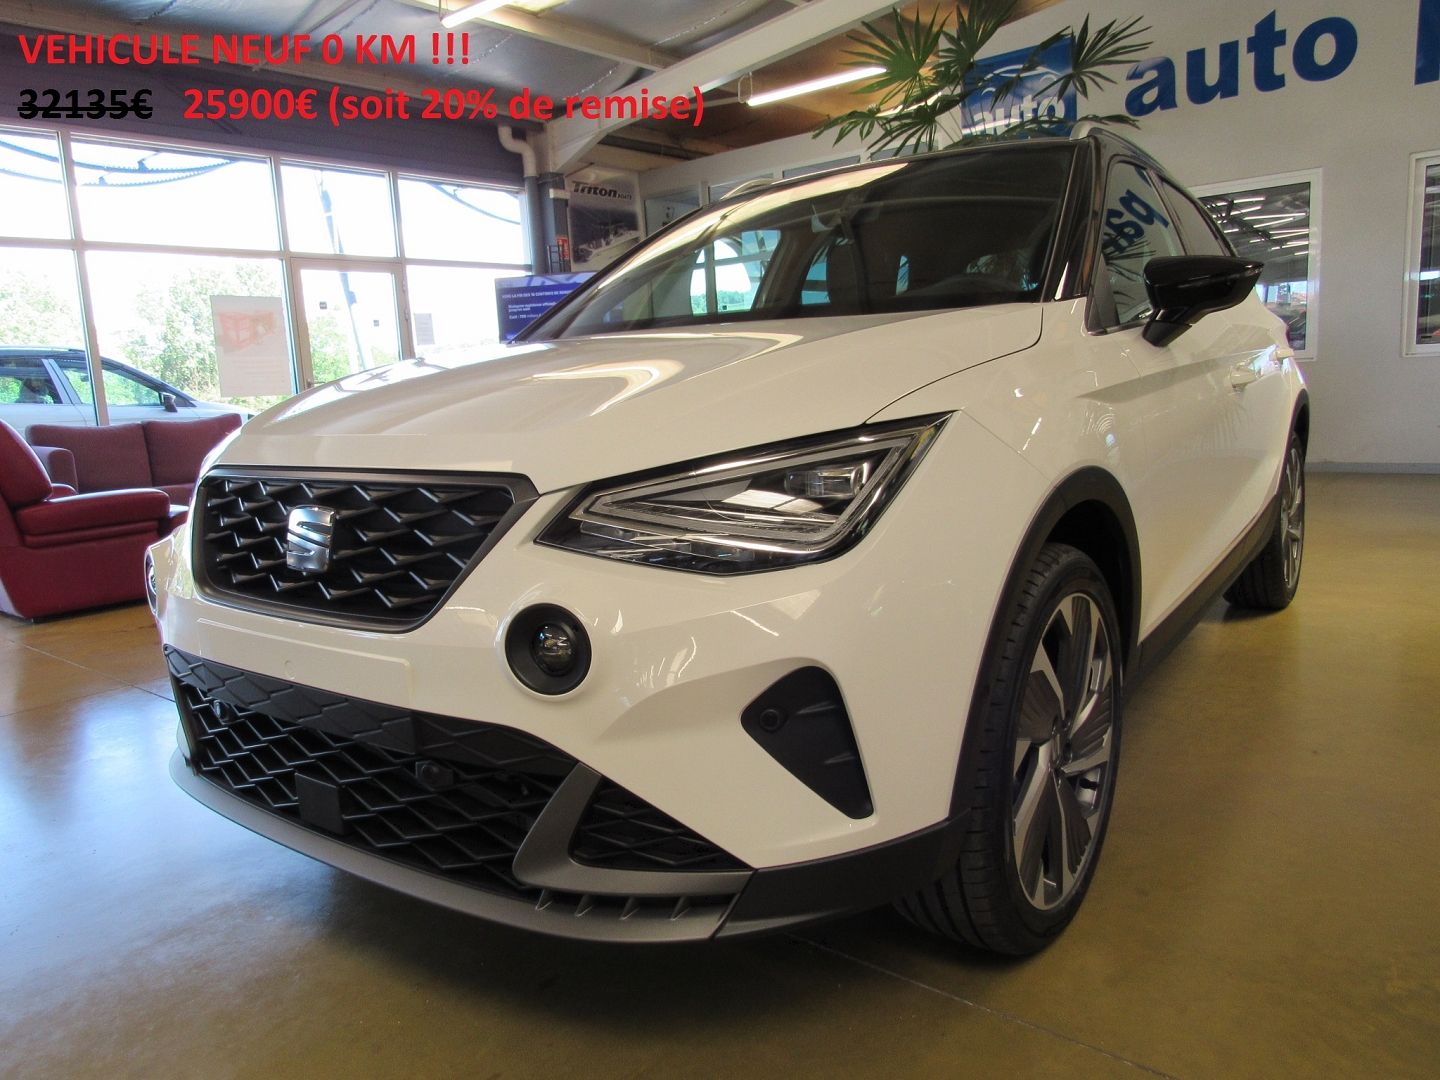 Véhicule d'occasion SEAT ARONA 1.5 TSI 150 ACT FR DSG7 + OPTIONS NEUF - 20 %